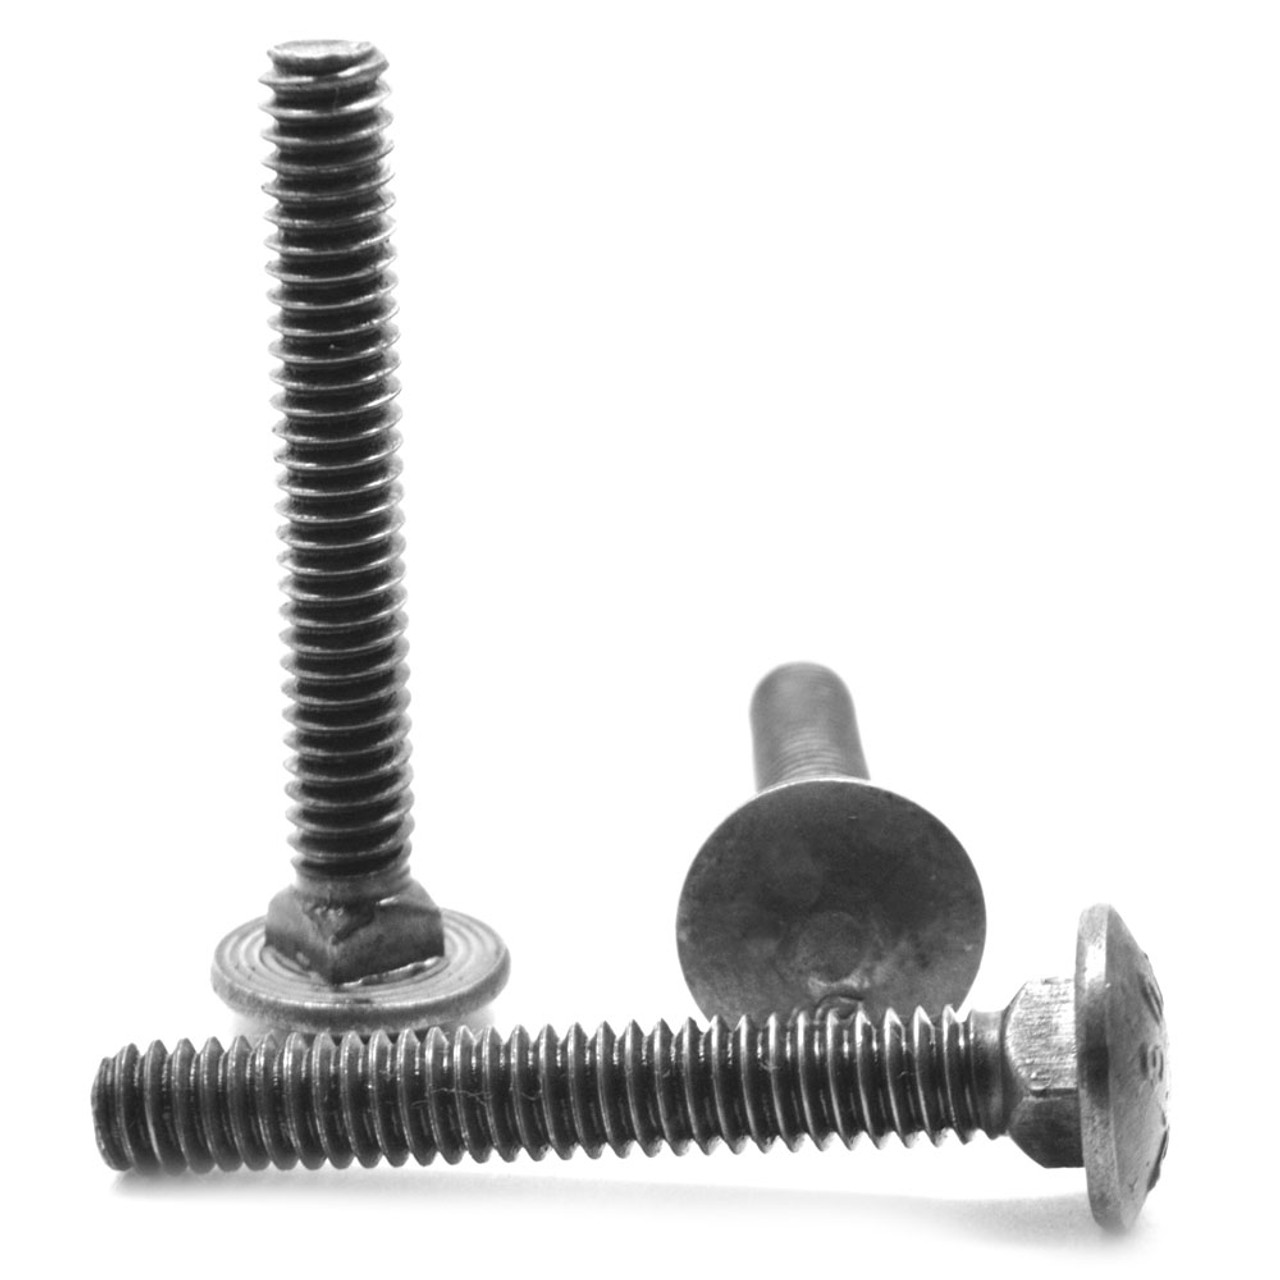 3/8"-16 x 2 1/2" (FT) Coarse Thread A307 Grade A Carriage Bolt Low Carbon Steel Plain Finish